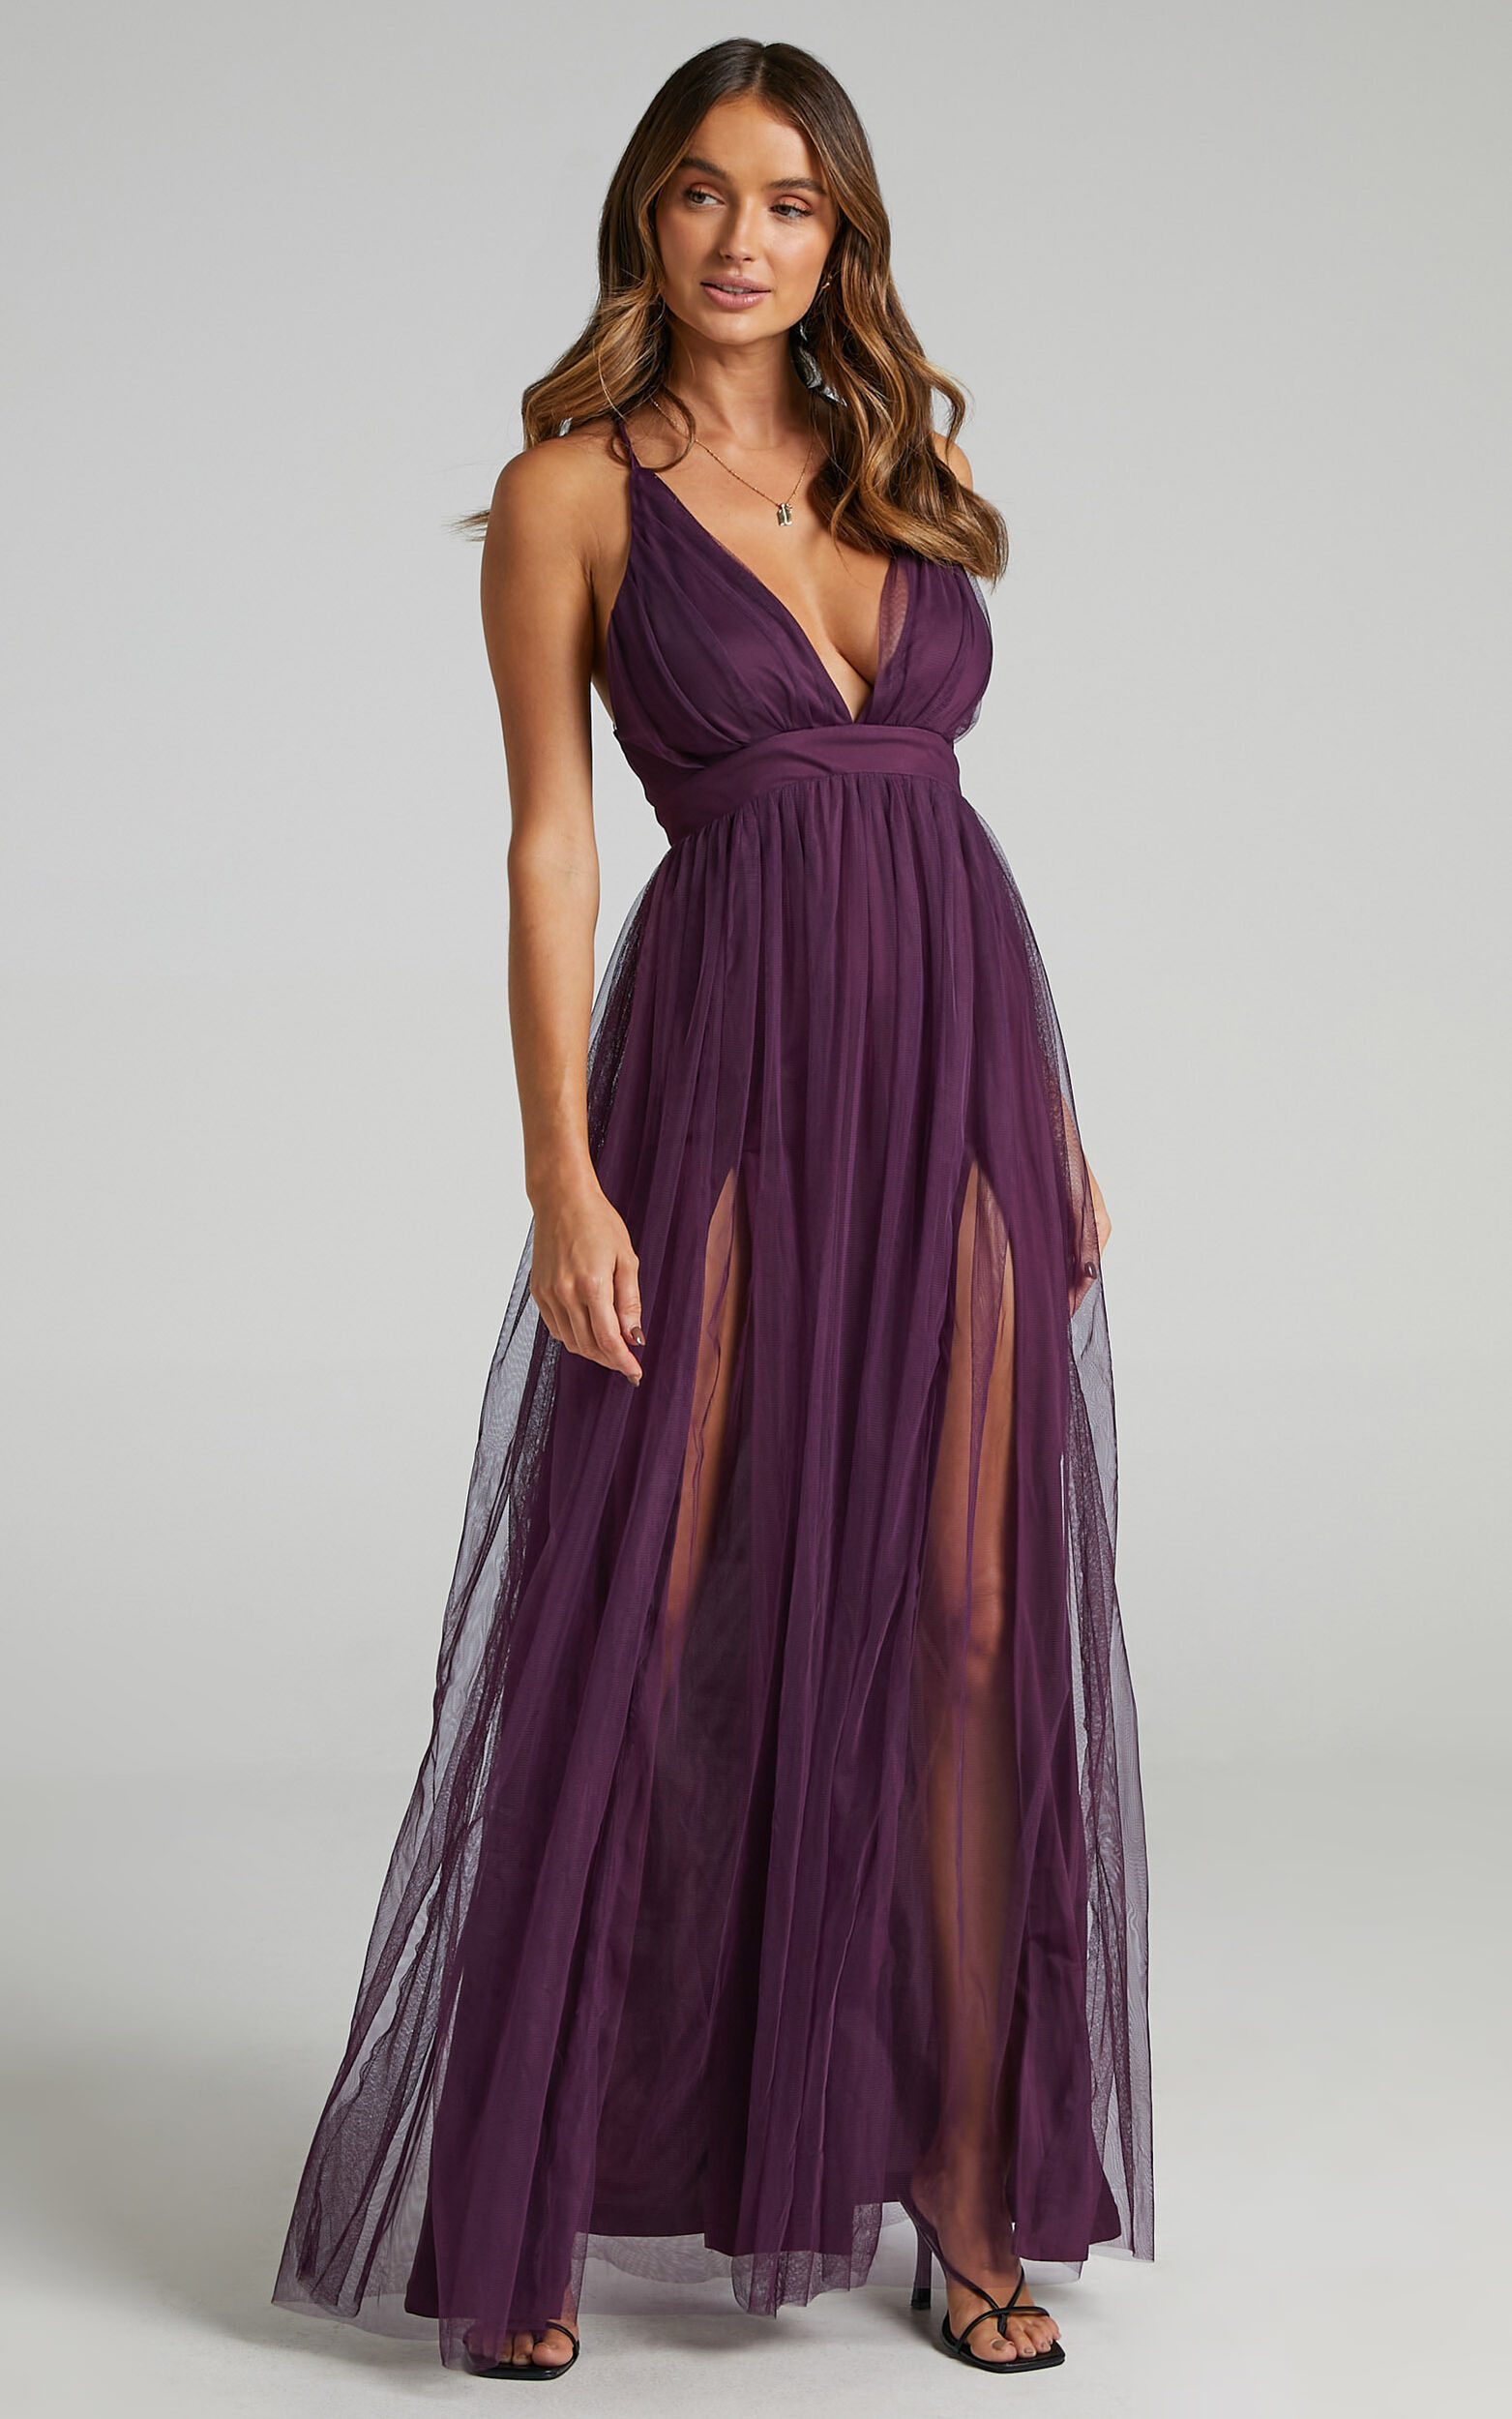 Like A Vision Midaxi Dress - Plunge Thigh Split Dress in Aubergine Tulle - 04, PRP4